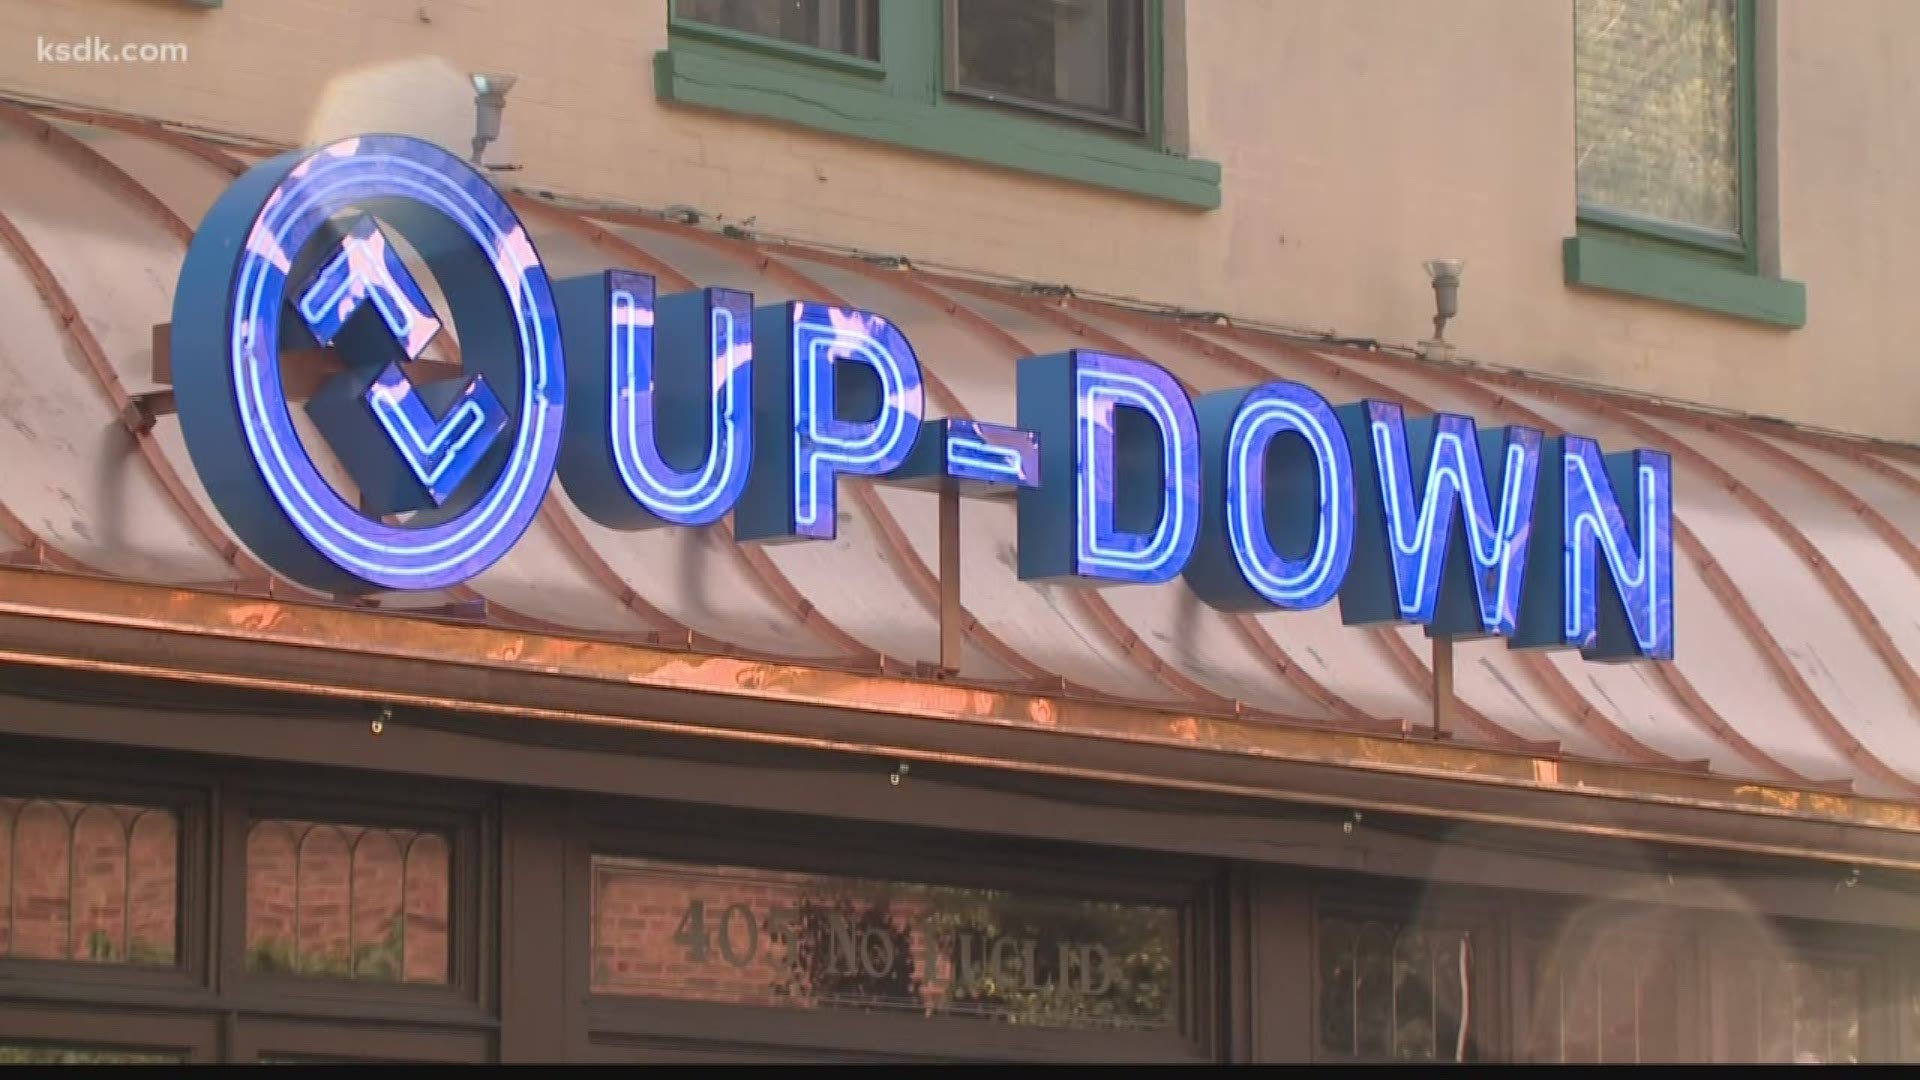 Up-Down will be allowed to keep serving alcohol while the legal process plays out.